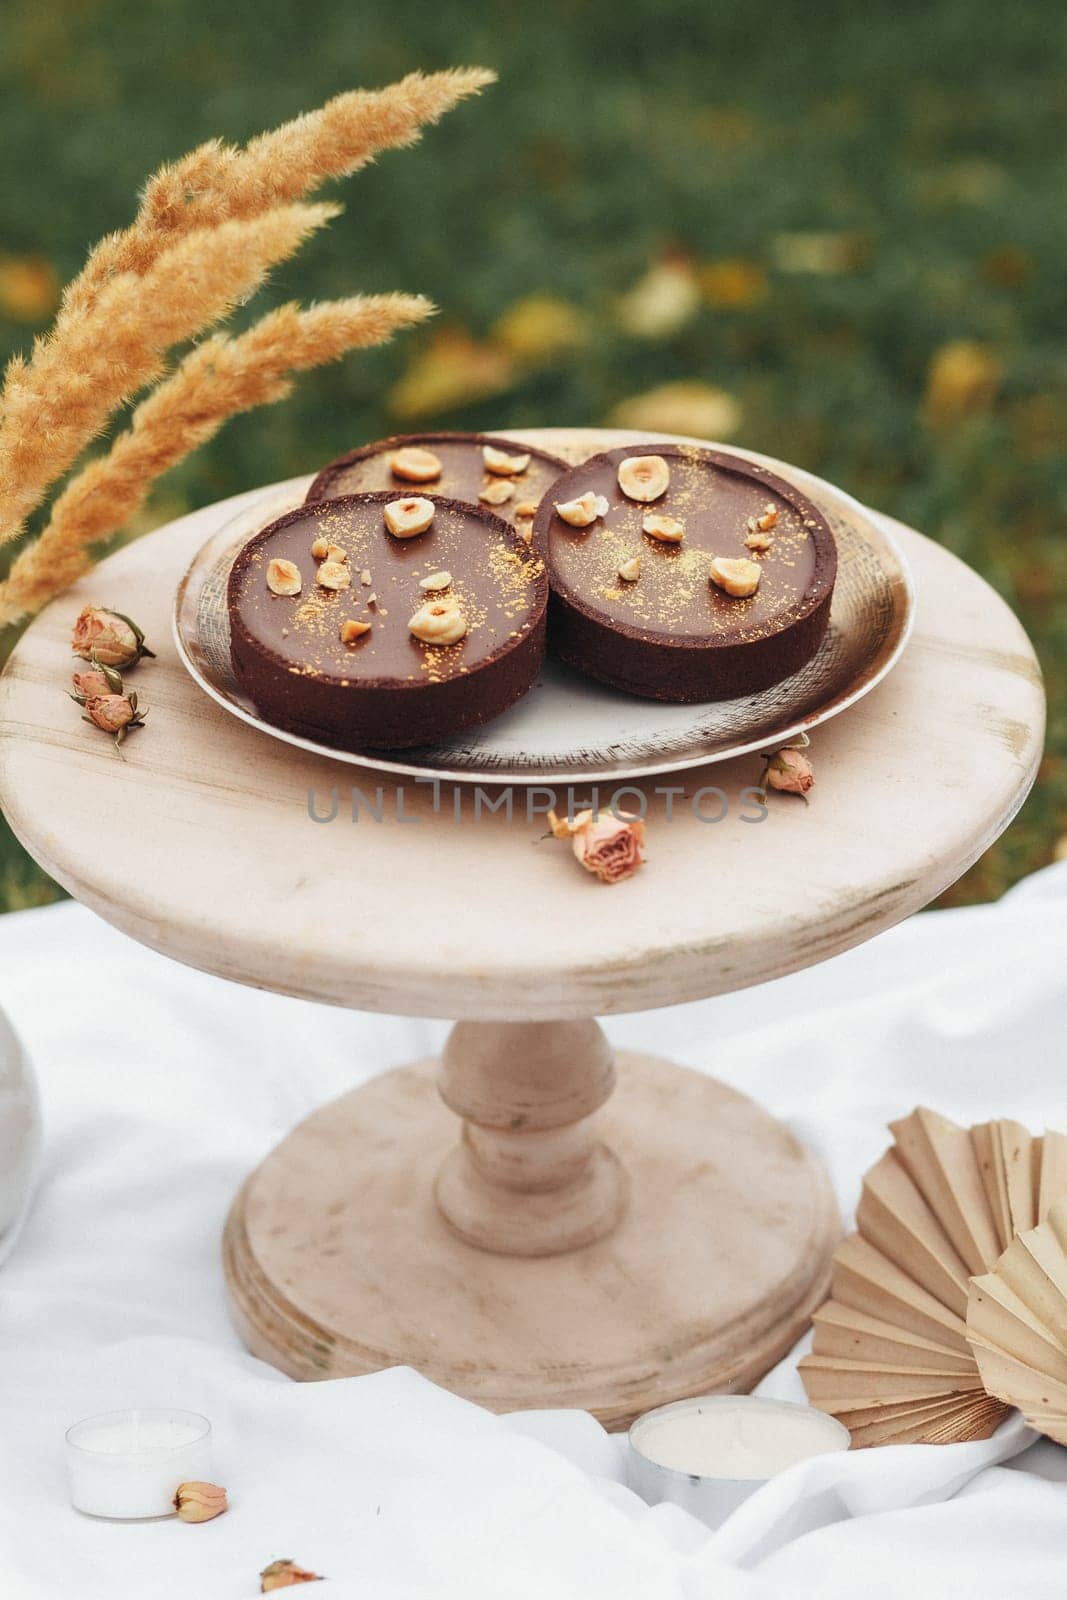 A delicious cake placed on a plate, adorned with a whimsical fan decoration, creating a unique and artistic dessert display.